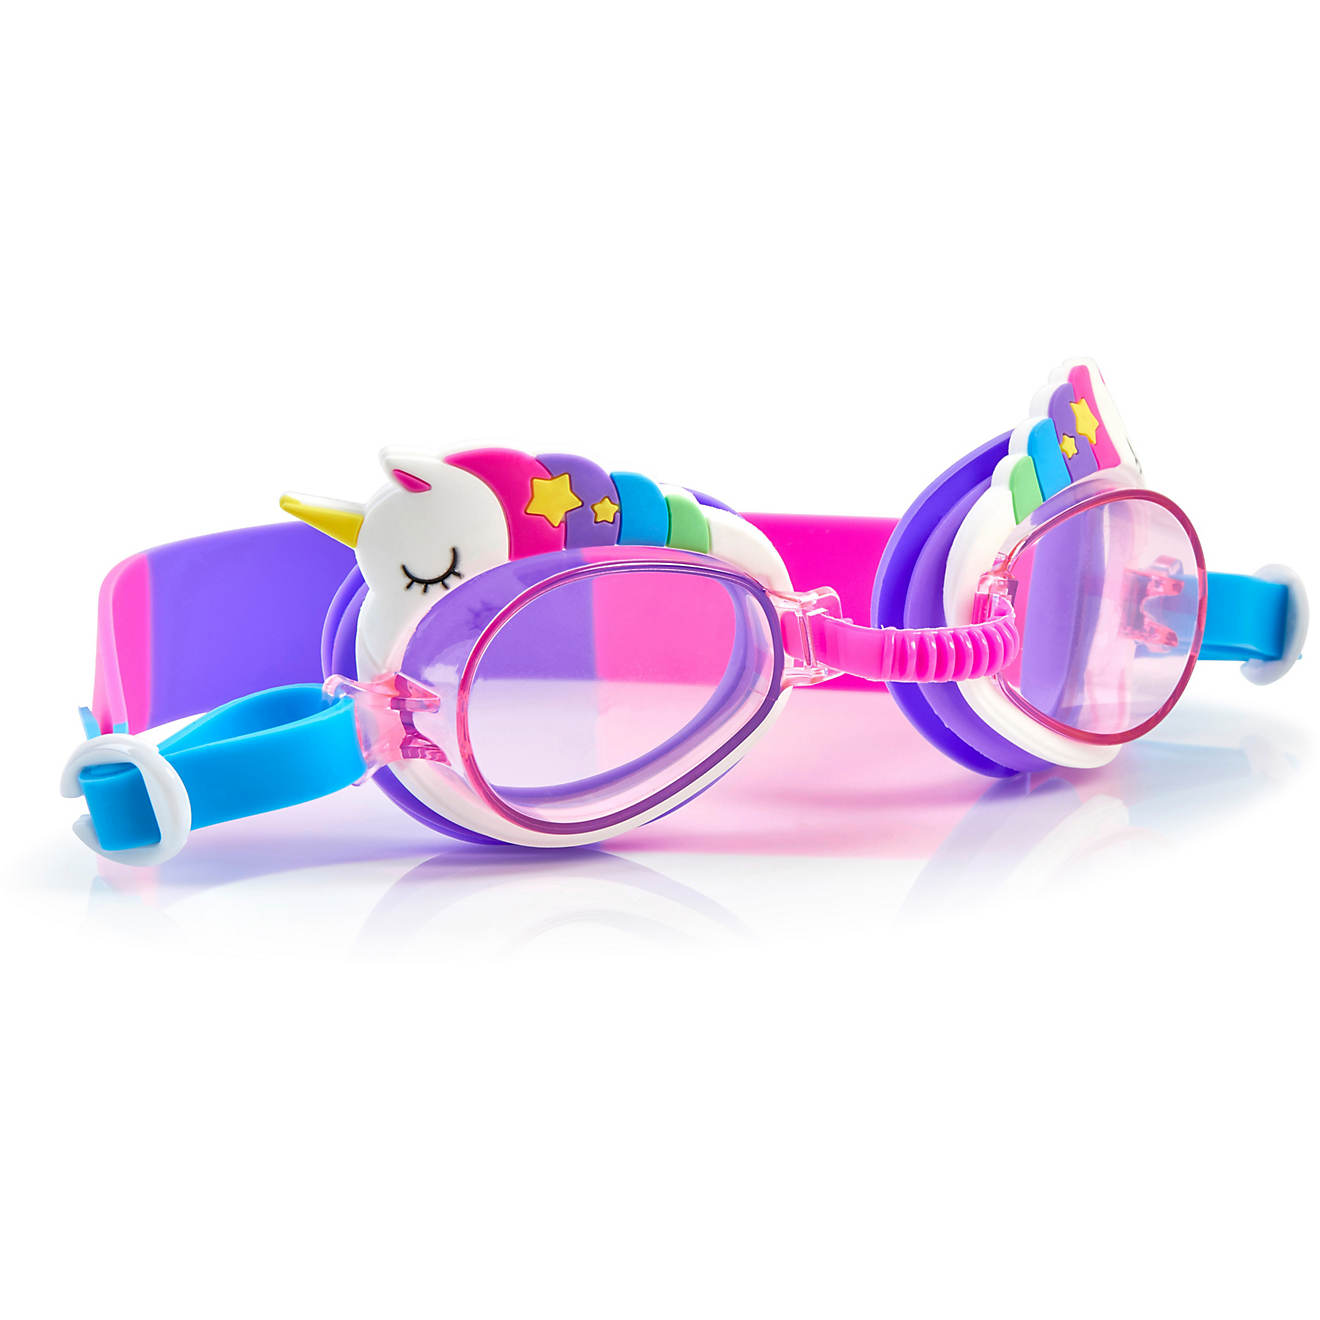 Bling swim goggles for kids: Unicorn goggles at Academy Sports